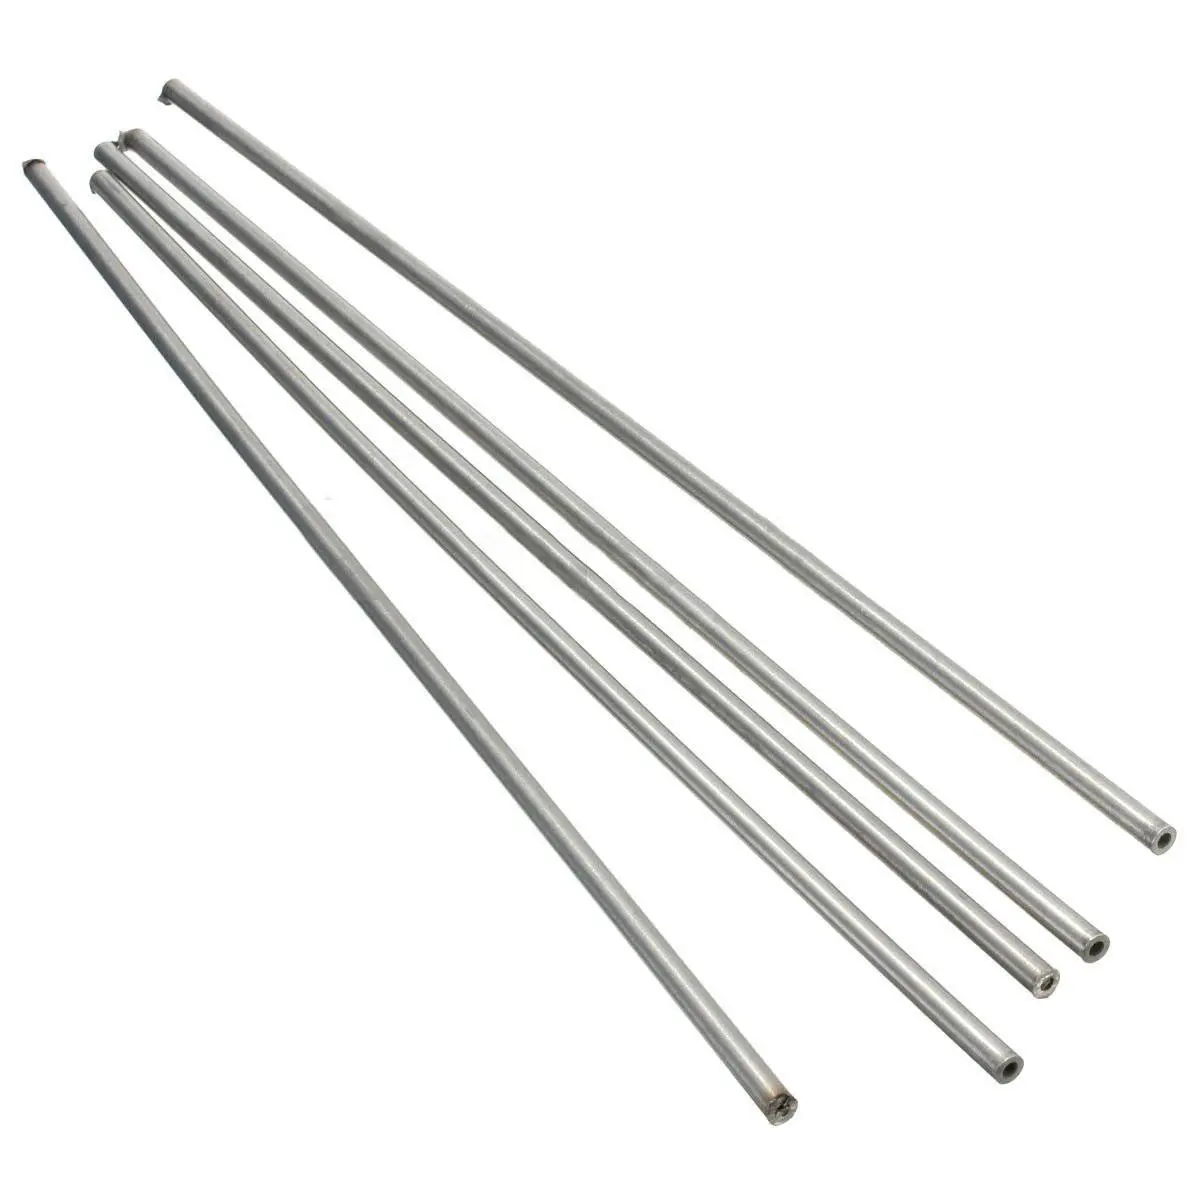 2pcs Length 250MM 304 Stainless Steel Capillary Tube OD 5mm x 3mm ID 